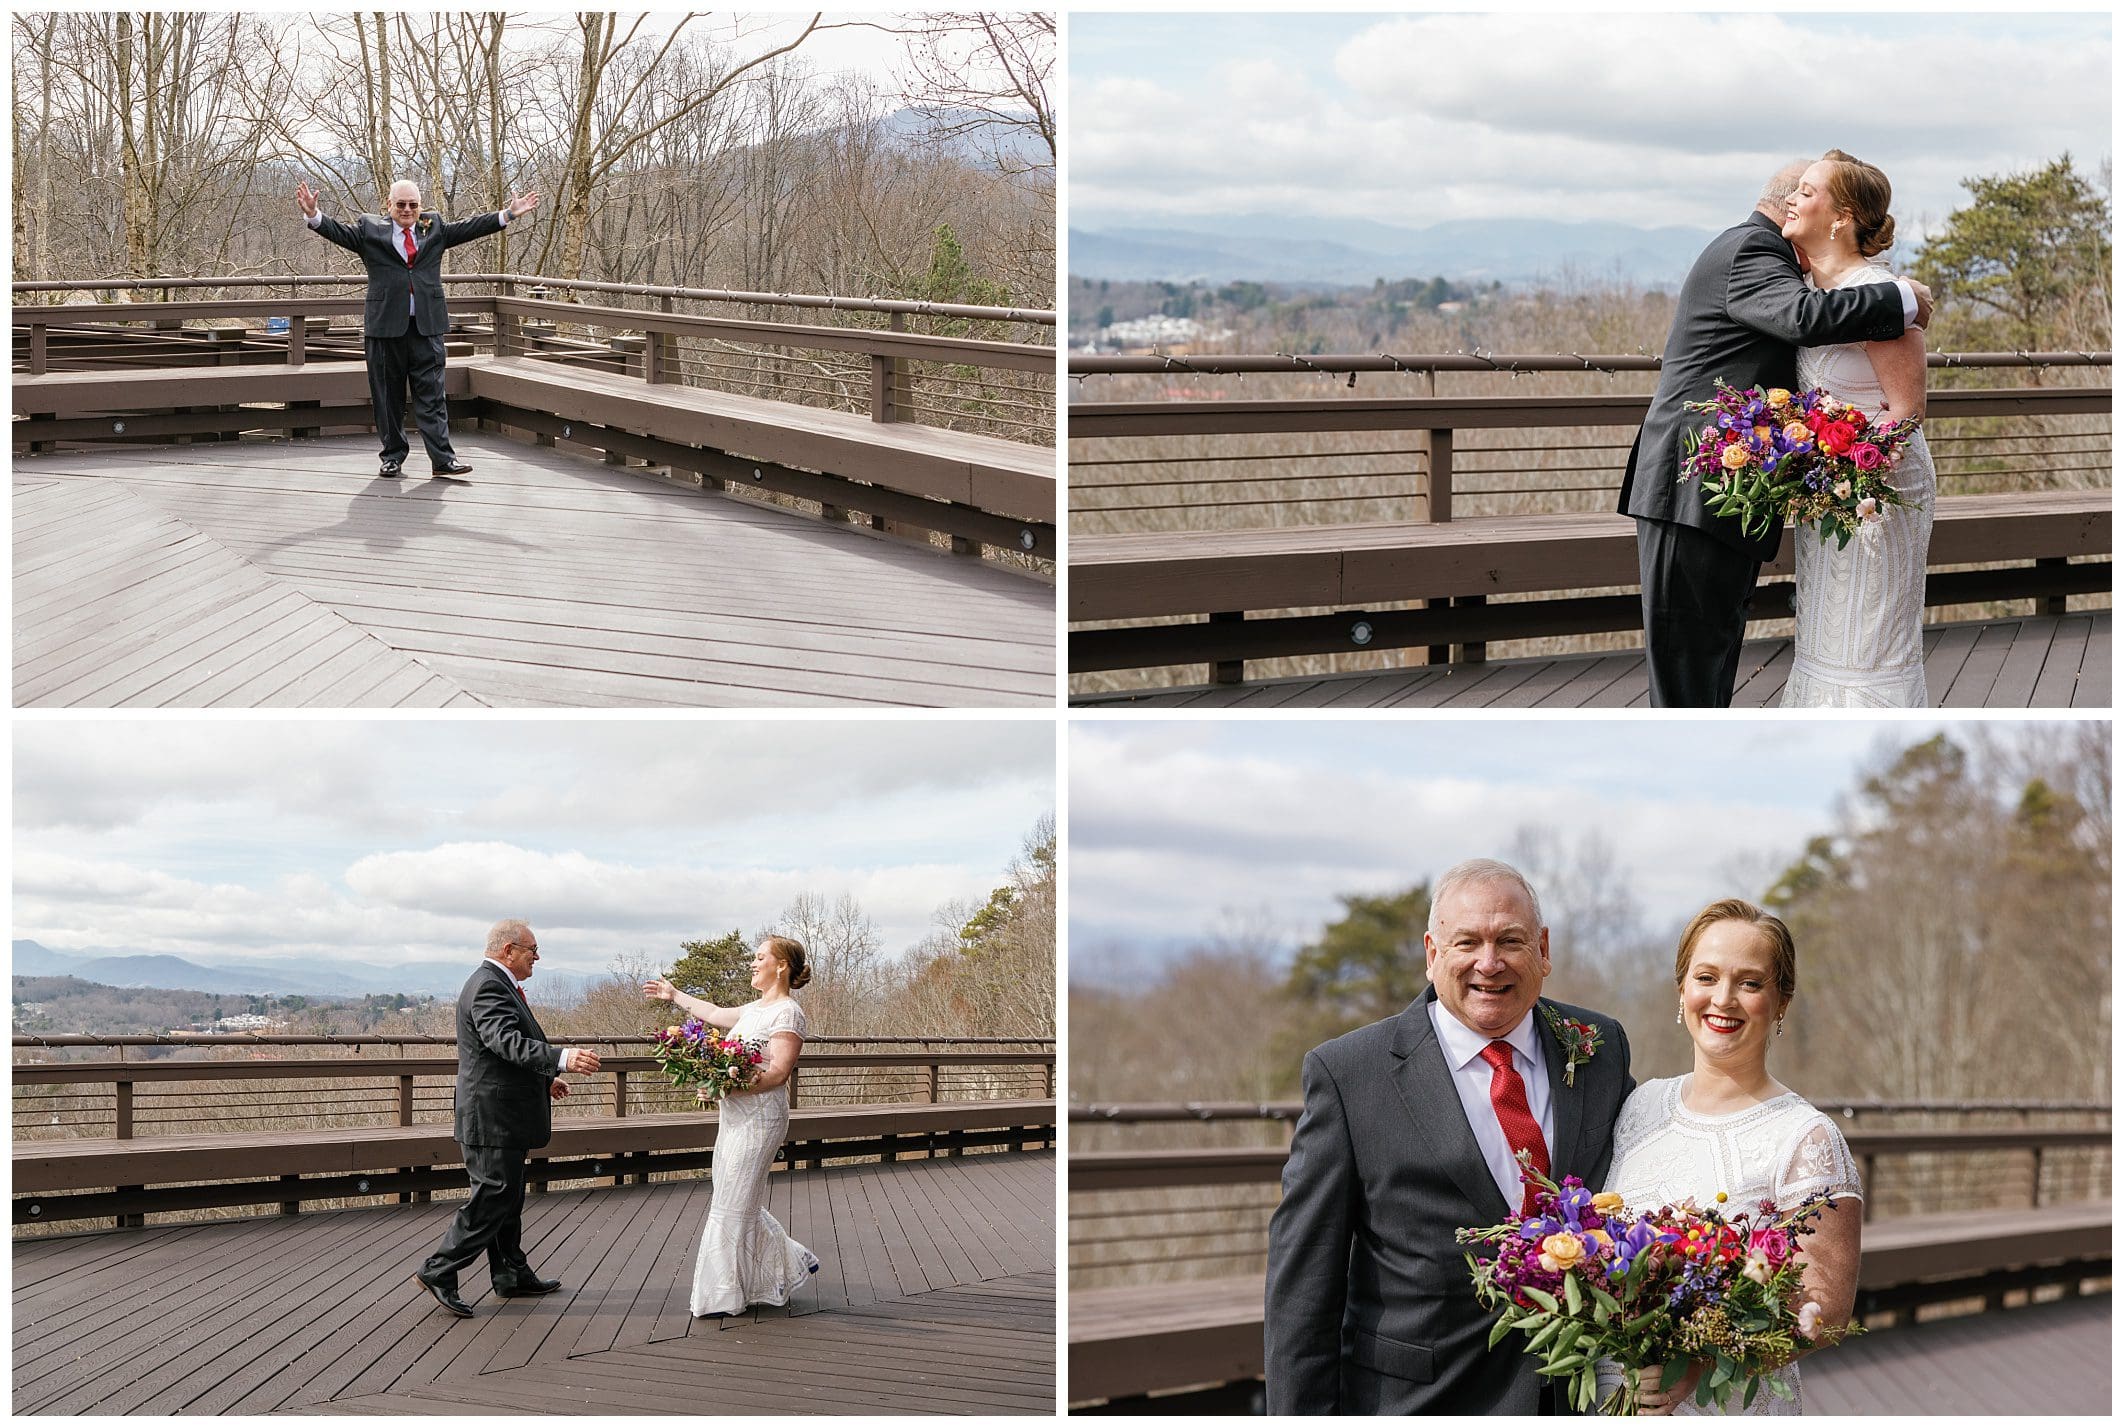 Four pictures of a bride and father sharing a first look at wedding with mountains in the background.